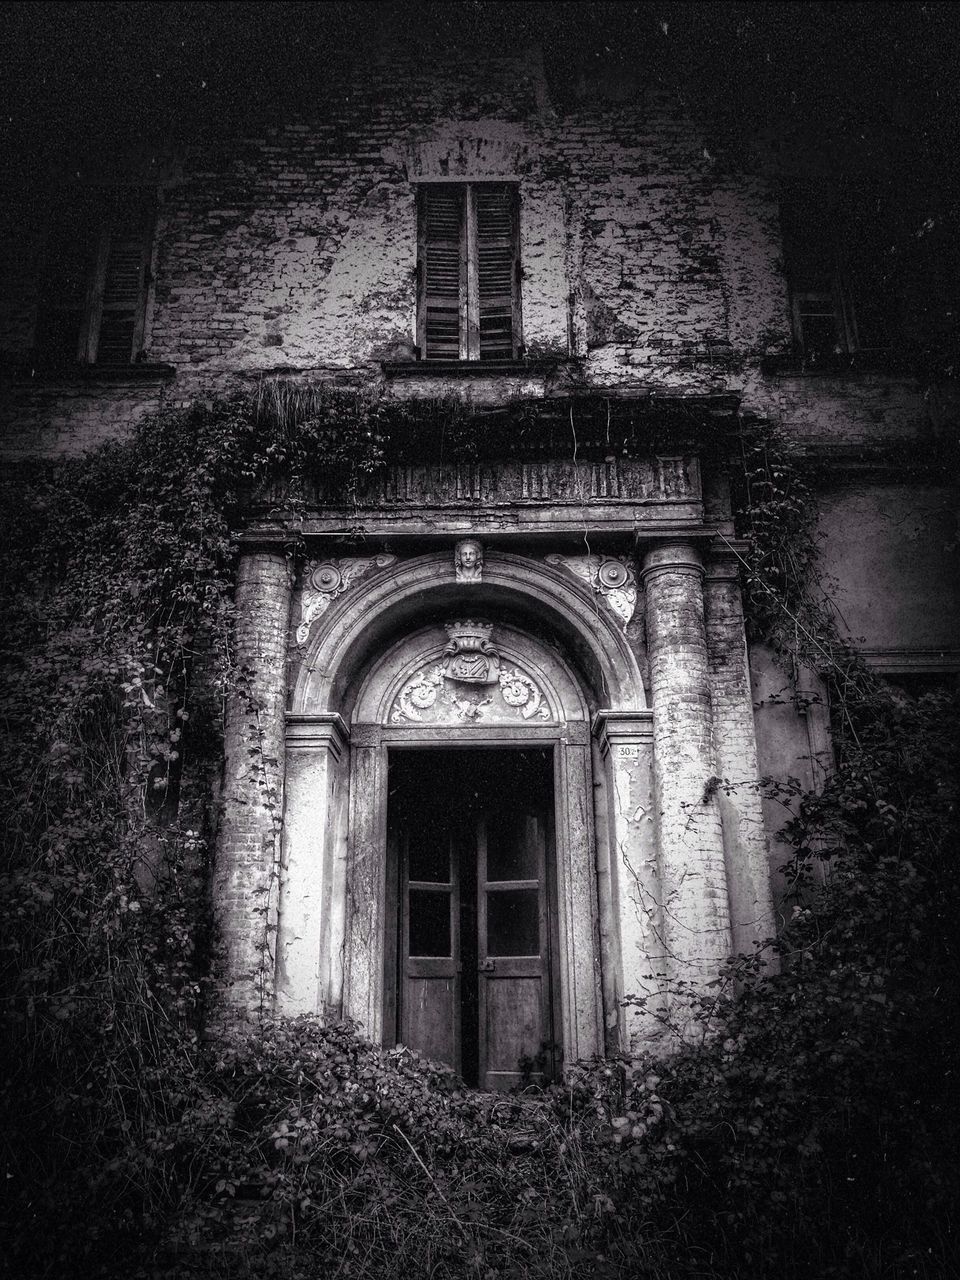 architecture, built structure, building exterior, window, door, house, arch, entrance, closed, facade, old, residential structure, residential building, doorway, day, outdoors, no people, building, wall, stone wall